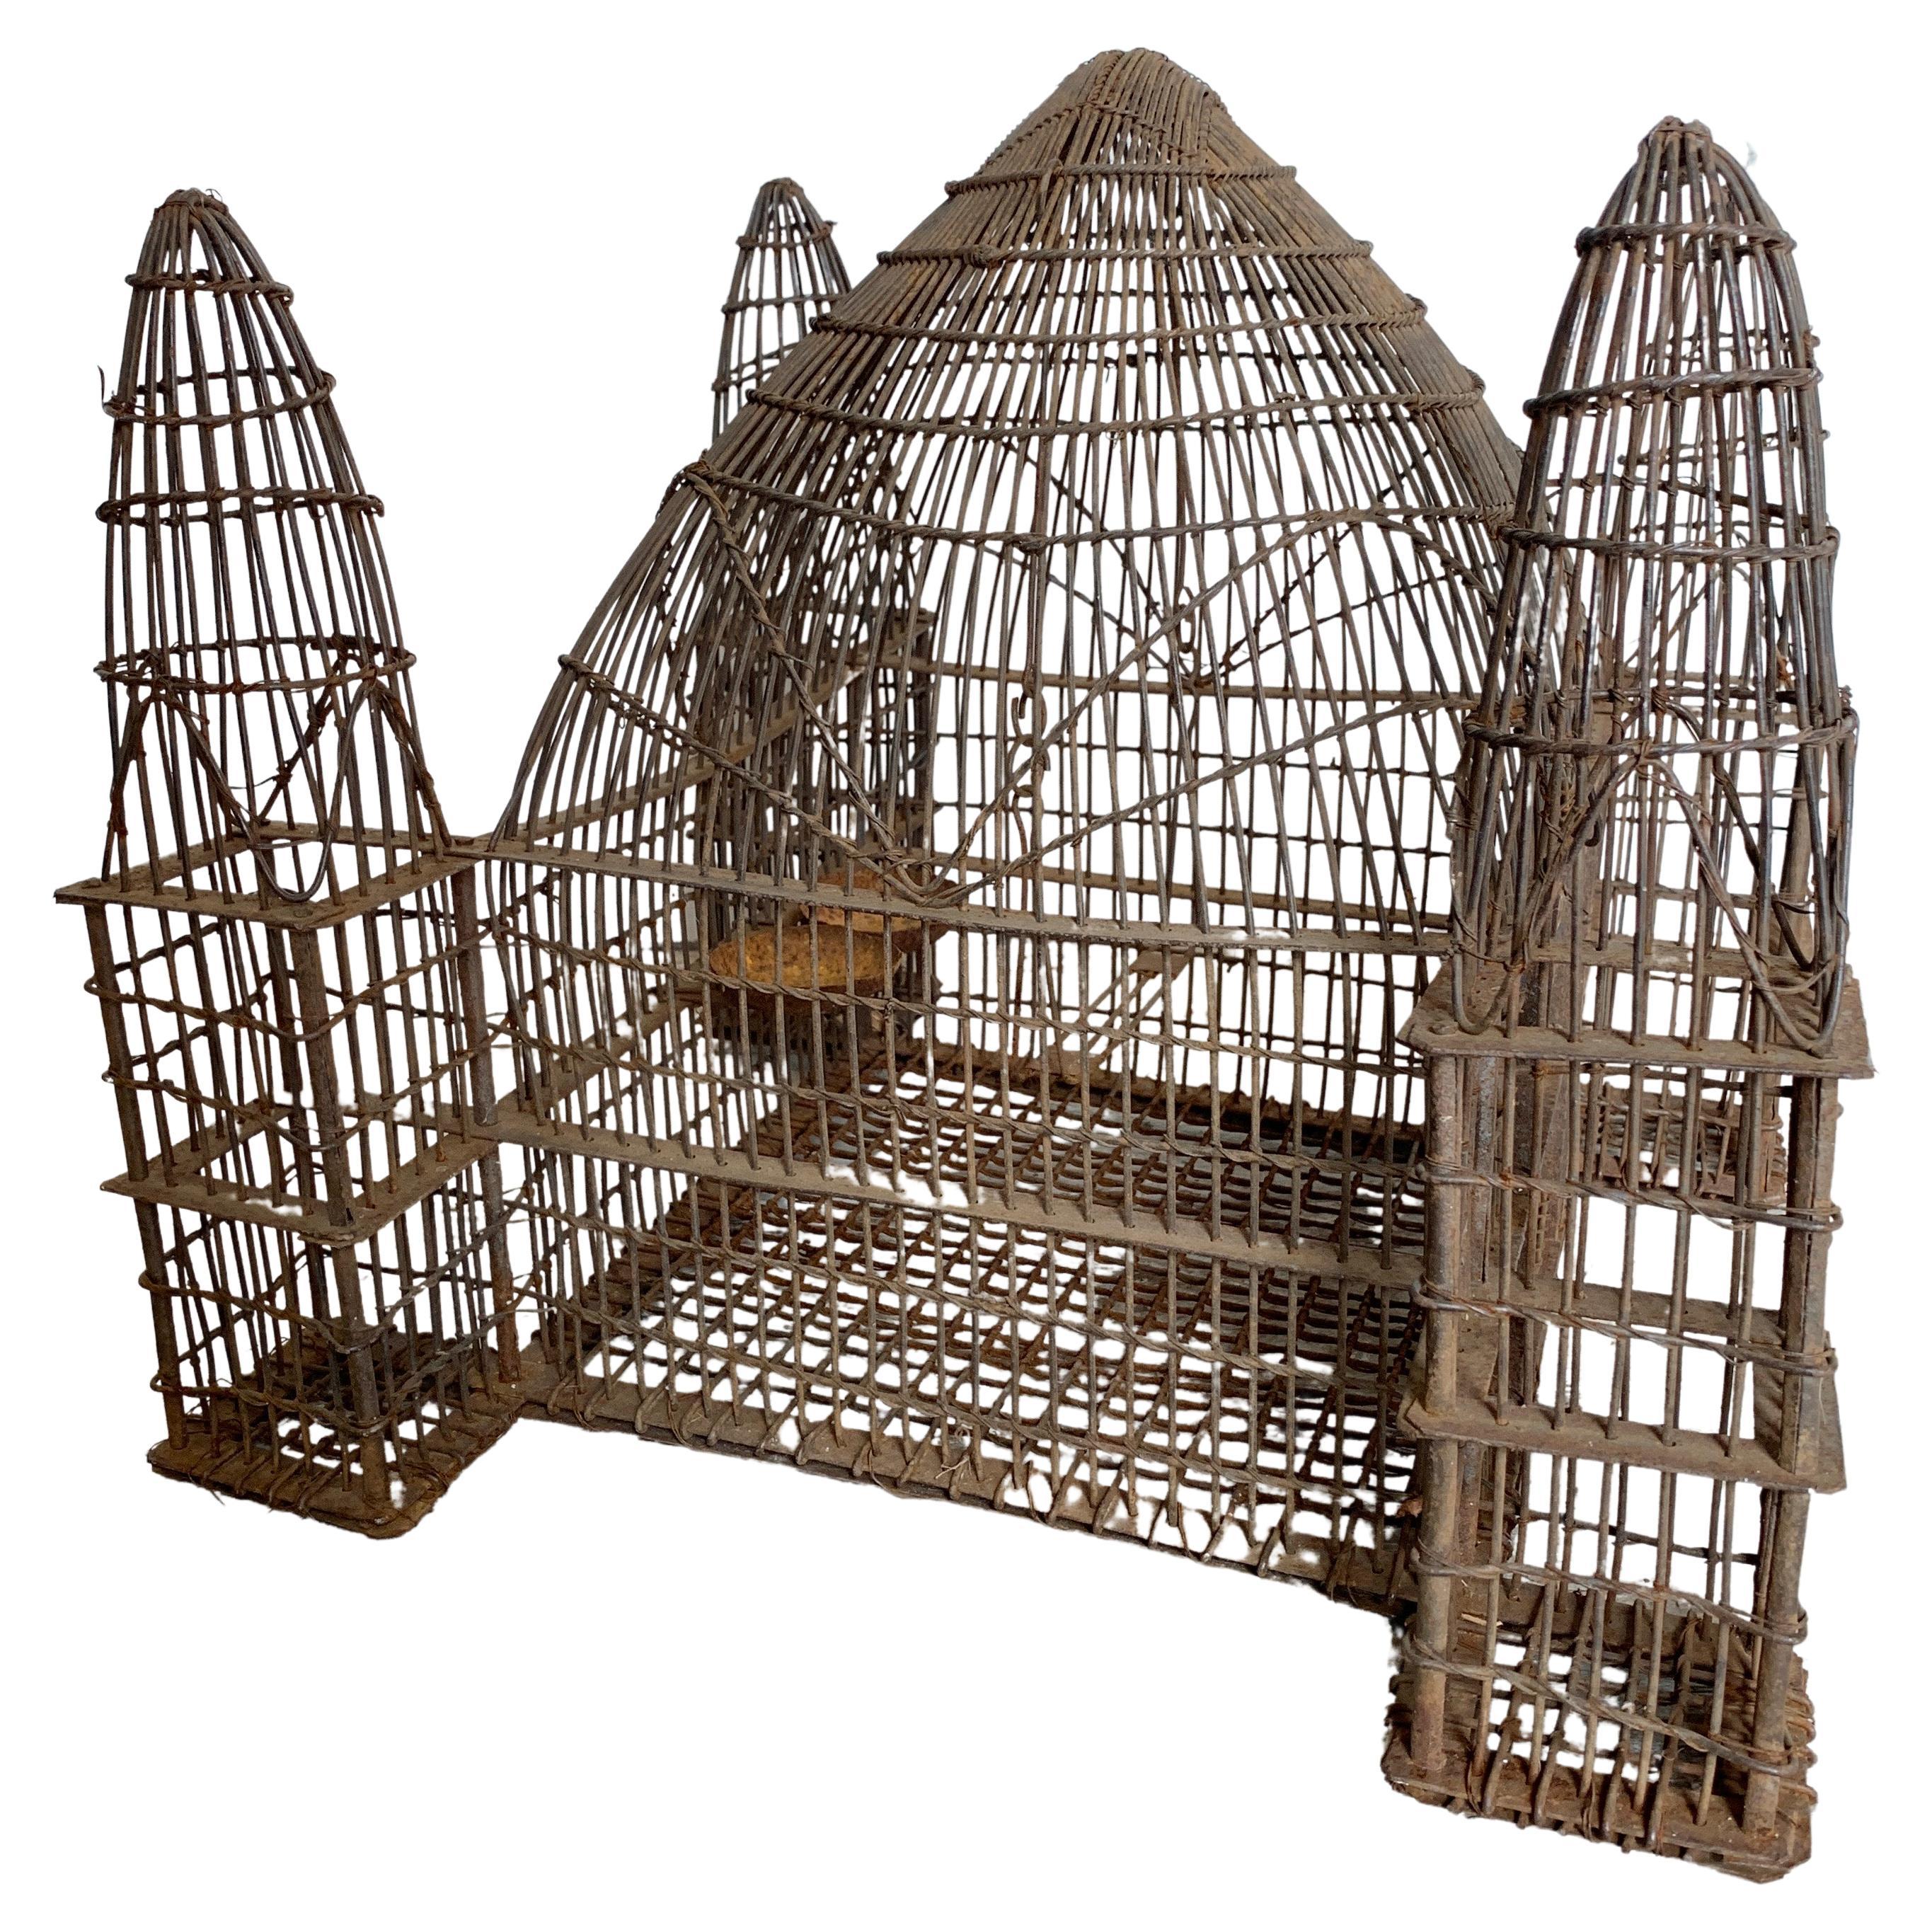 Wooden Bird Cages - 30 For Sale on 1stDibs  wooden birdcage, antique  wooden bird cage, wooden bird cage vintage